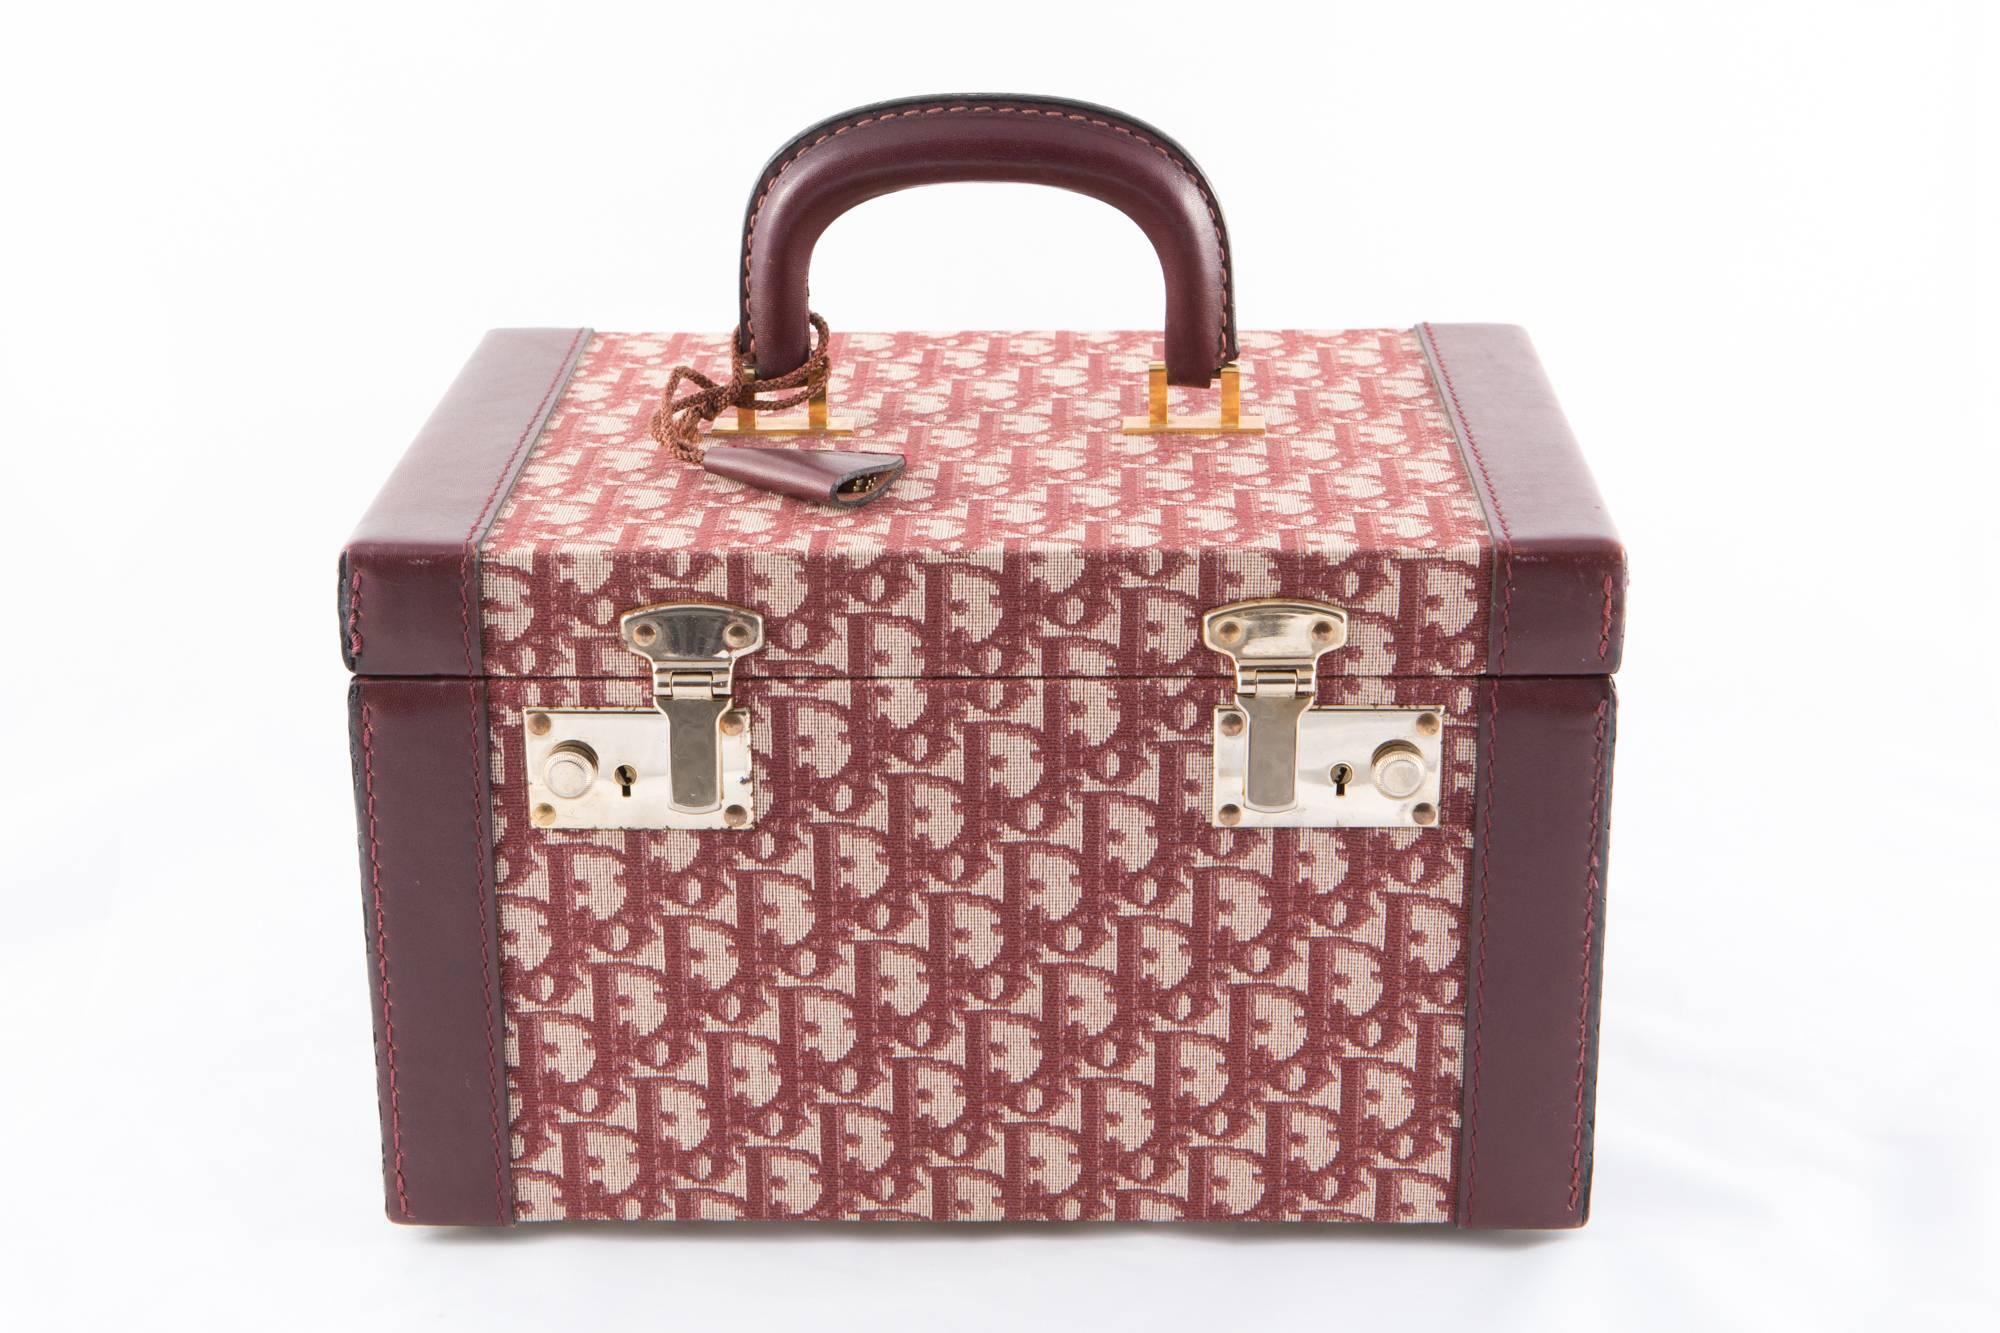 1970s Dior bordeaux cotton monogram vanity case featuring an all over logo pattern, a leather top handle, claps opening, comes with 2 keys,a bordeaux leather finishing, an inside off white cotton finishing, with a minor and compartments.
Total